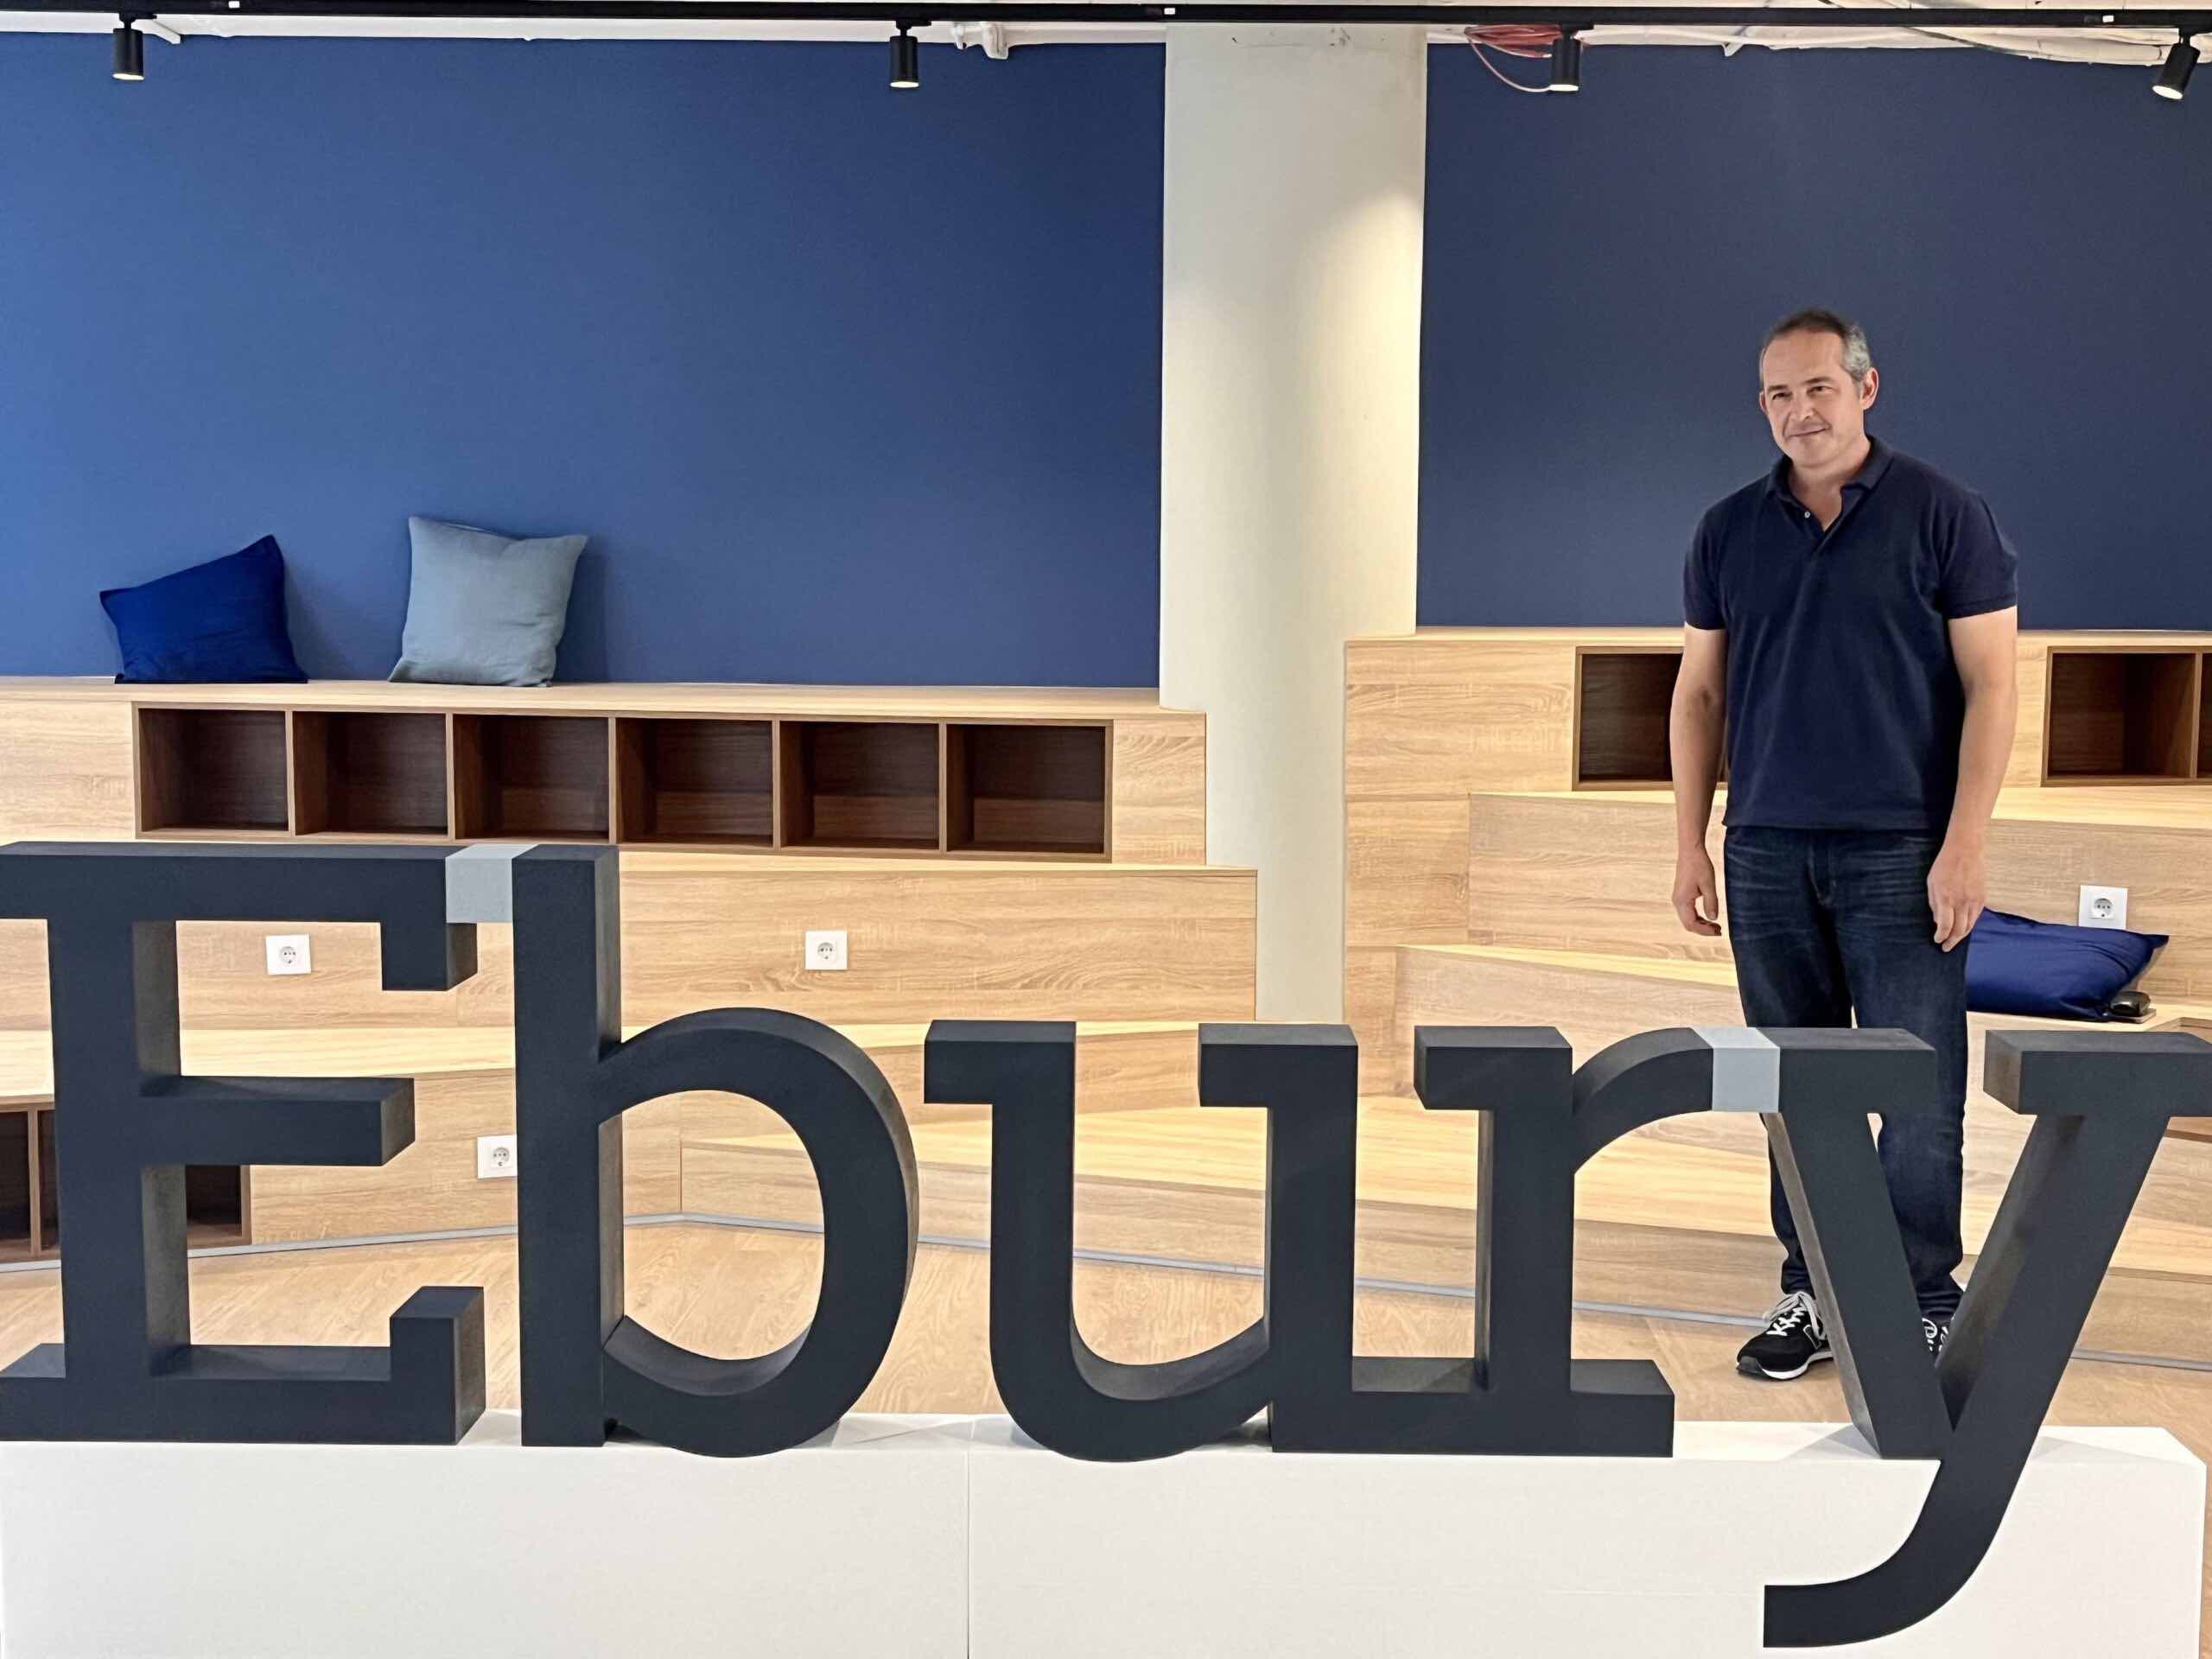 Ebury Appoints Goldman Sachs for £2bn IPO in London